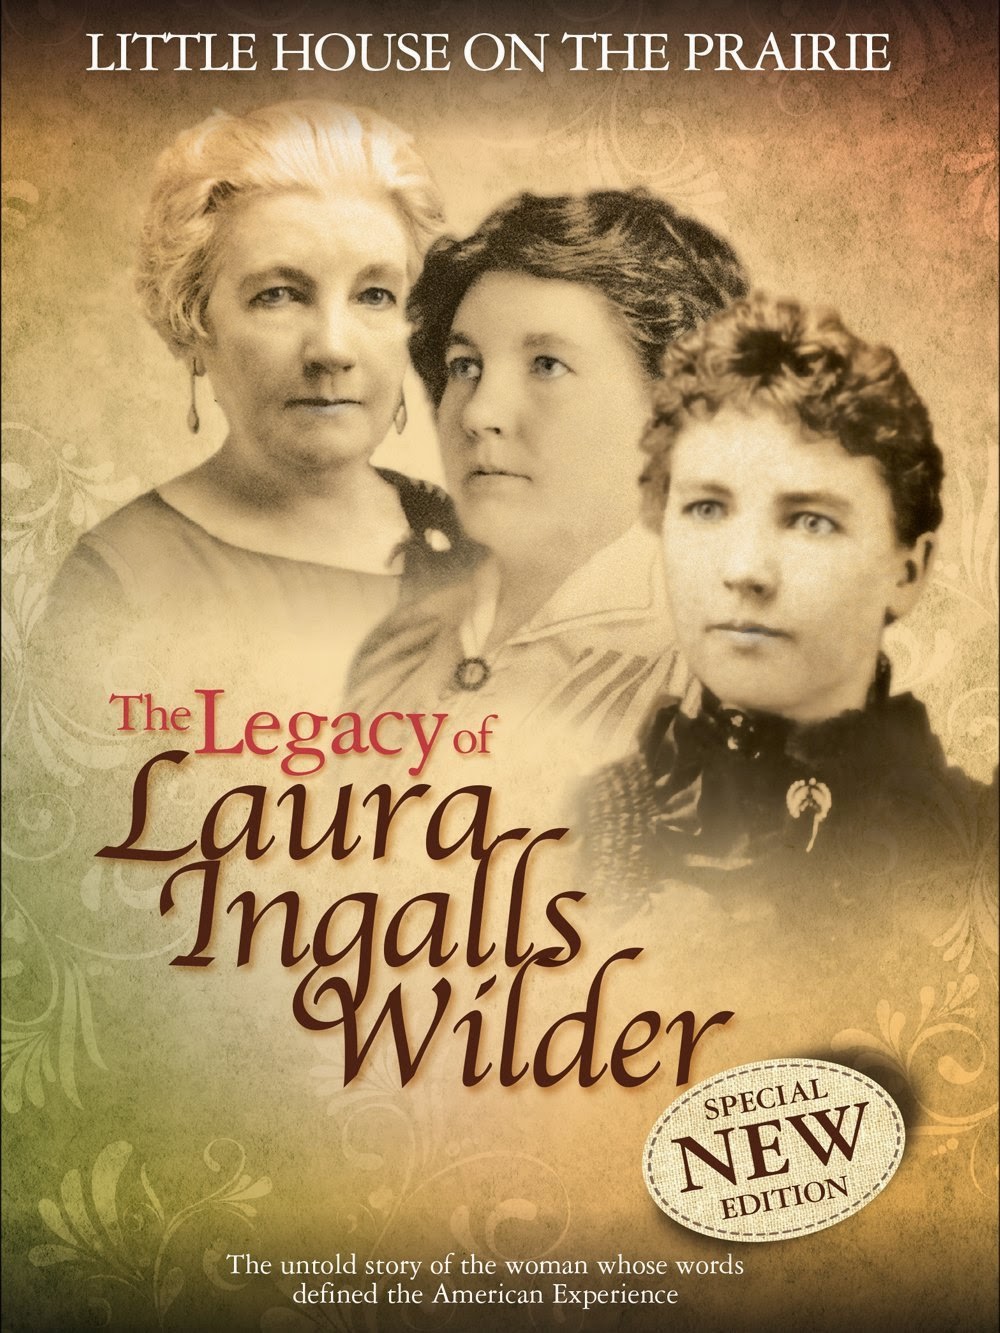 New documentary: The Legacy of Laura Ingalls Wilder.